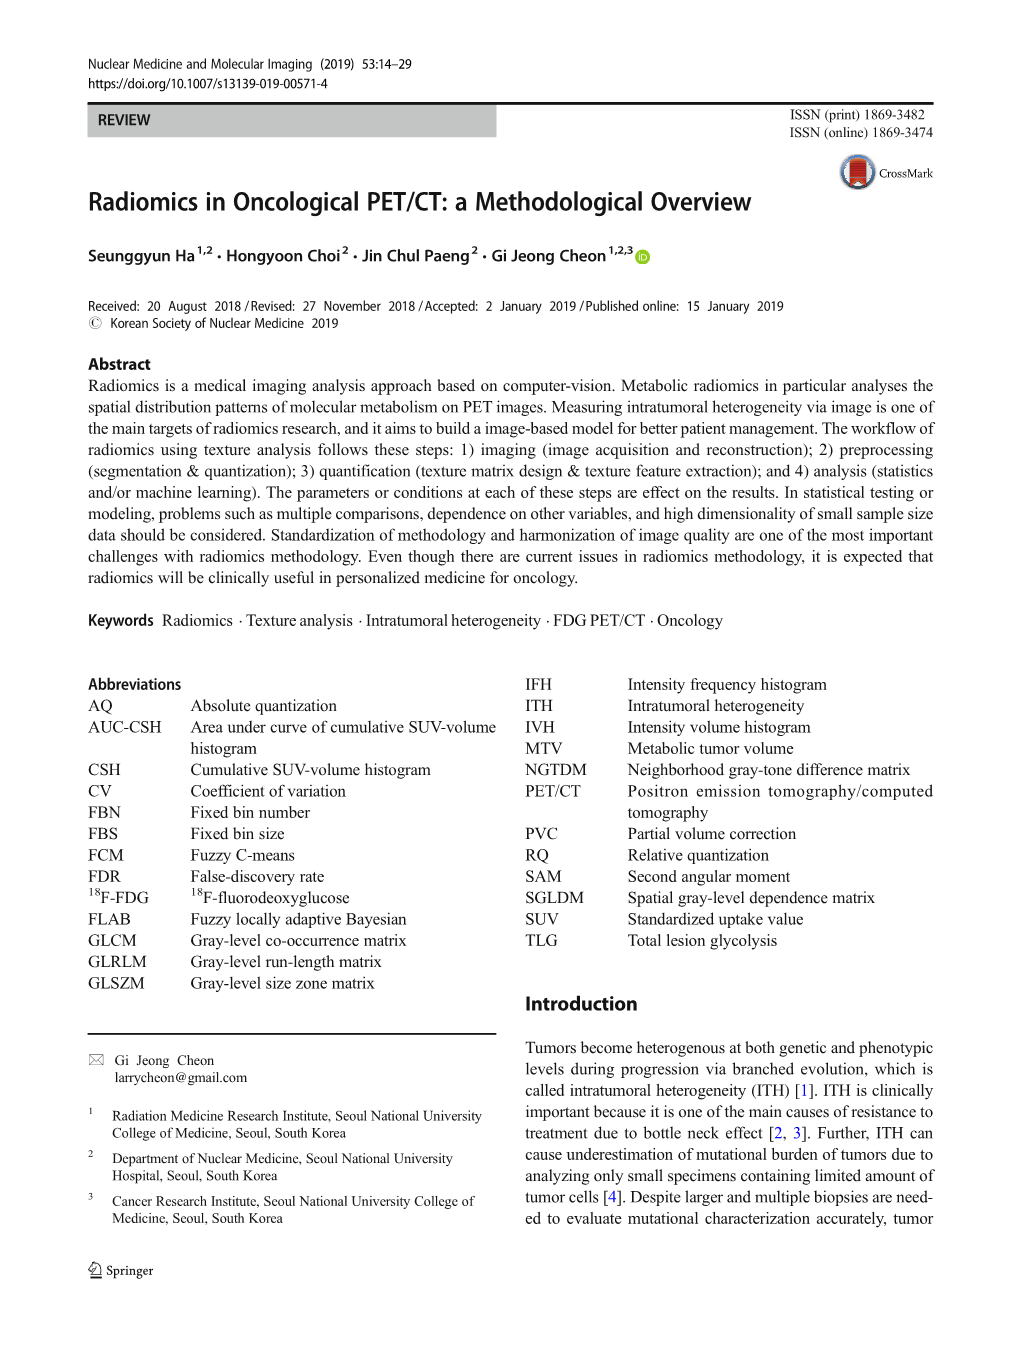 Radiomics in Oncological PET/CT: a Methodological Overview